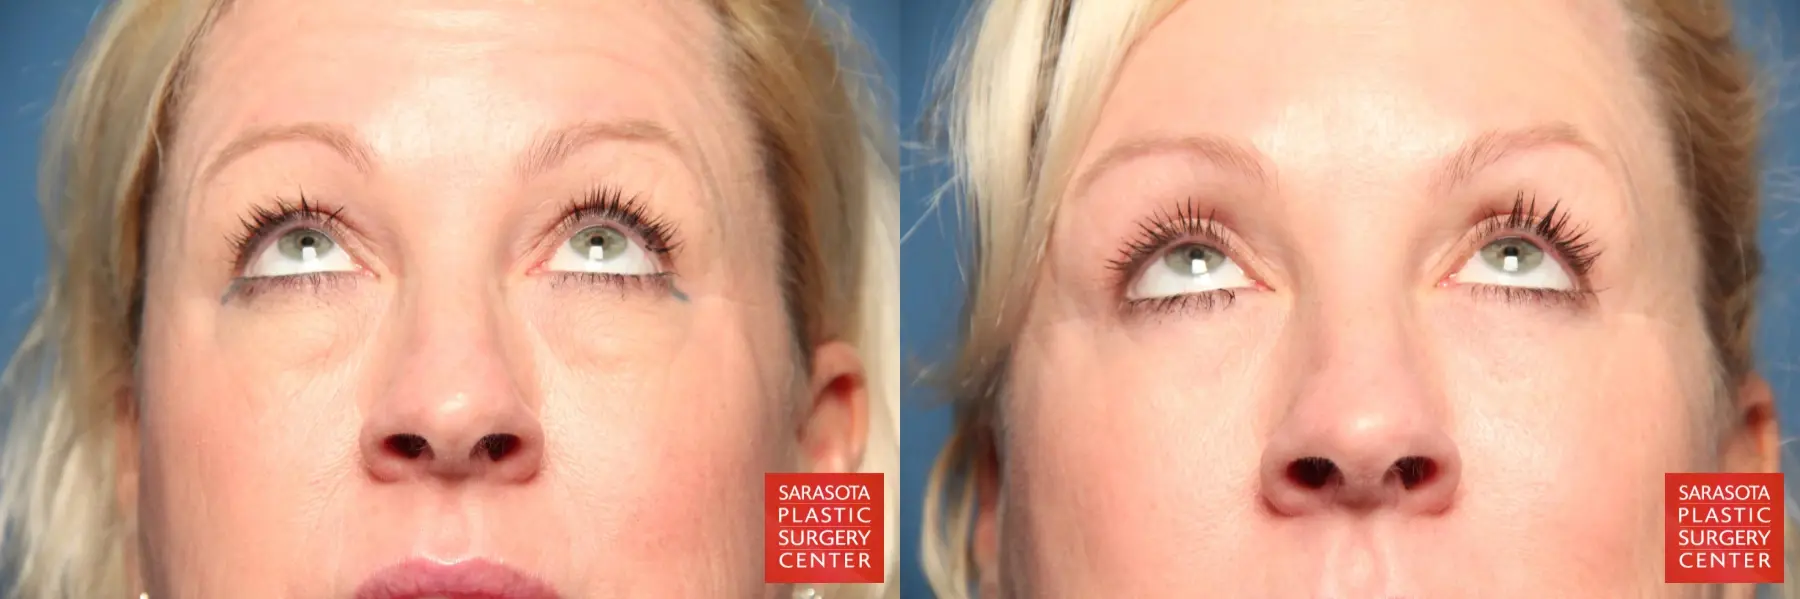 Eyelid Lift: Patient 4 - Before and After 4